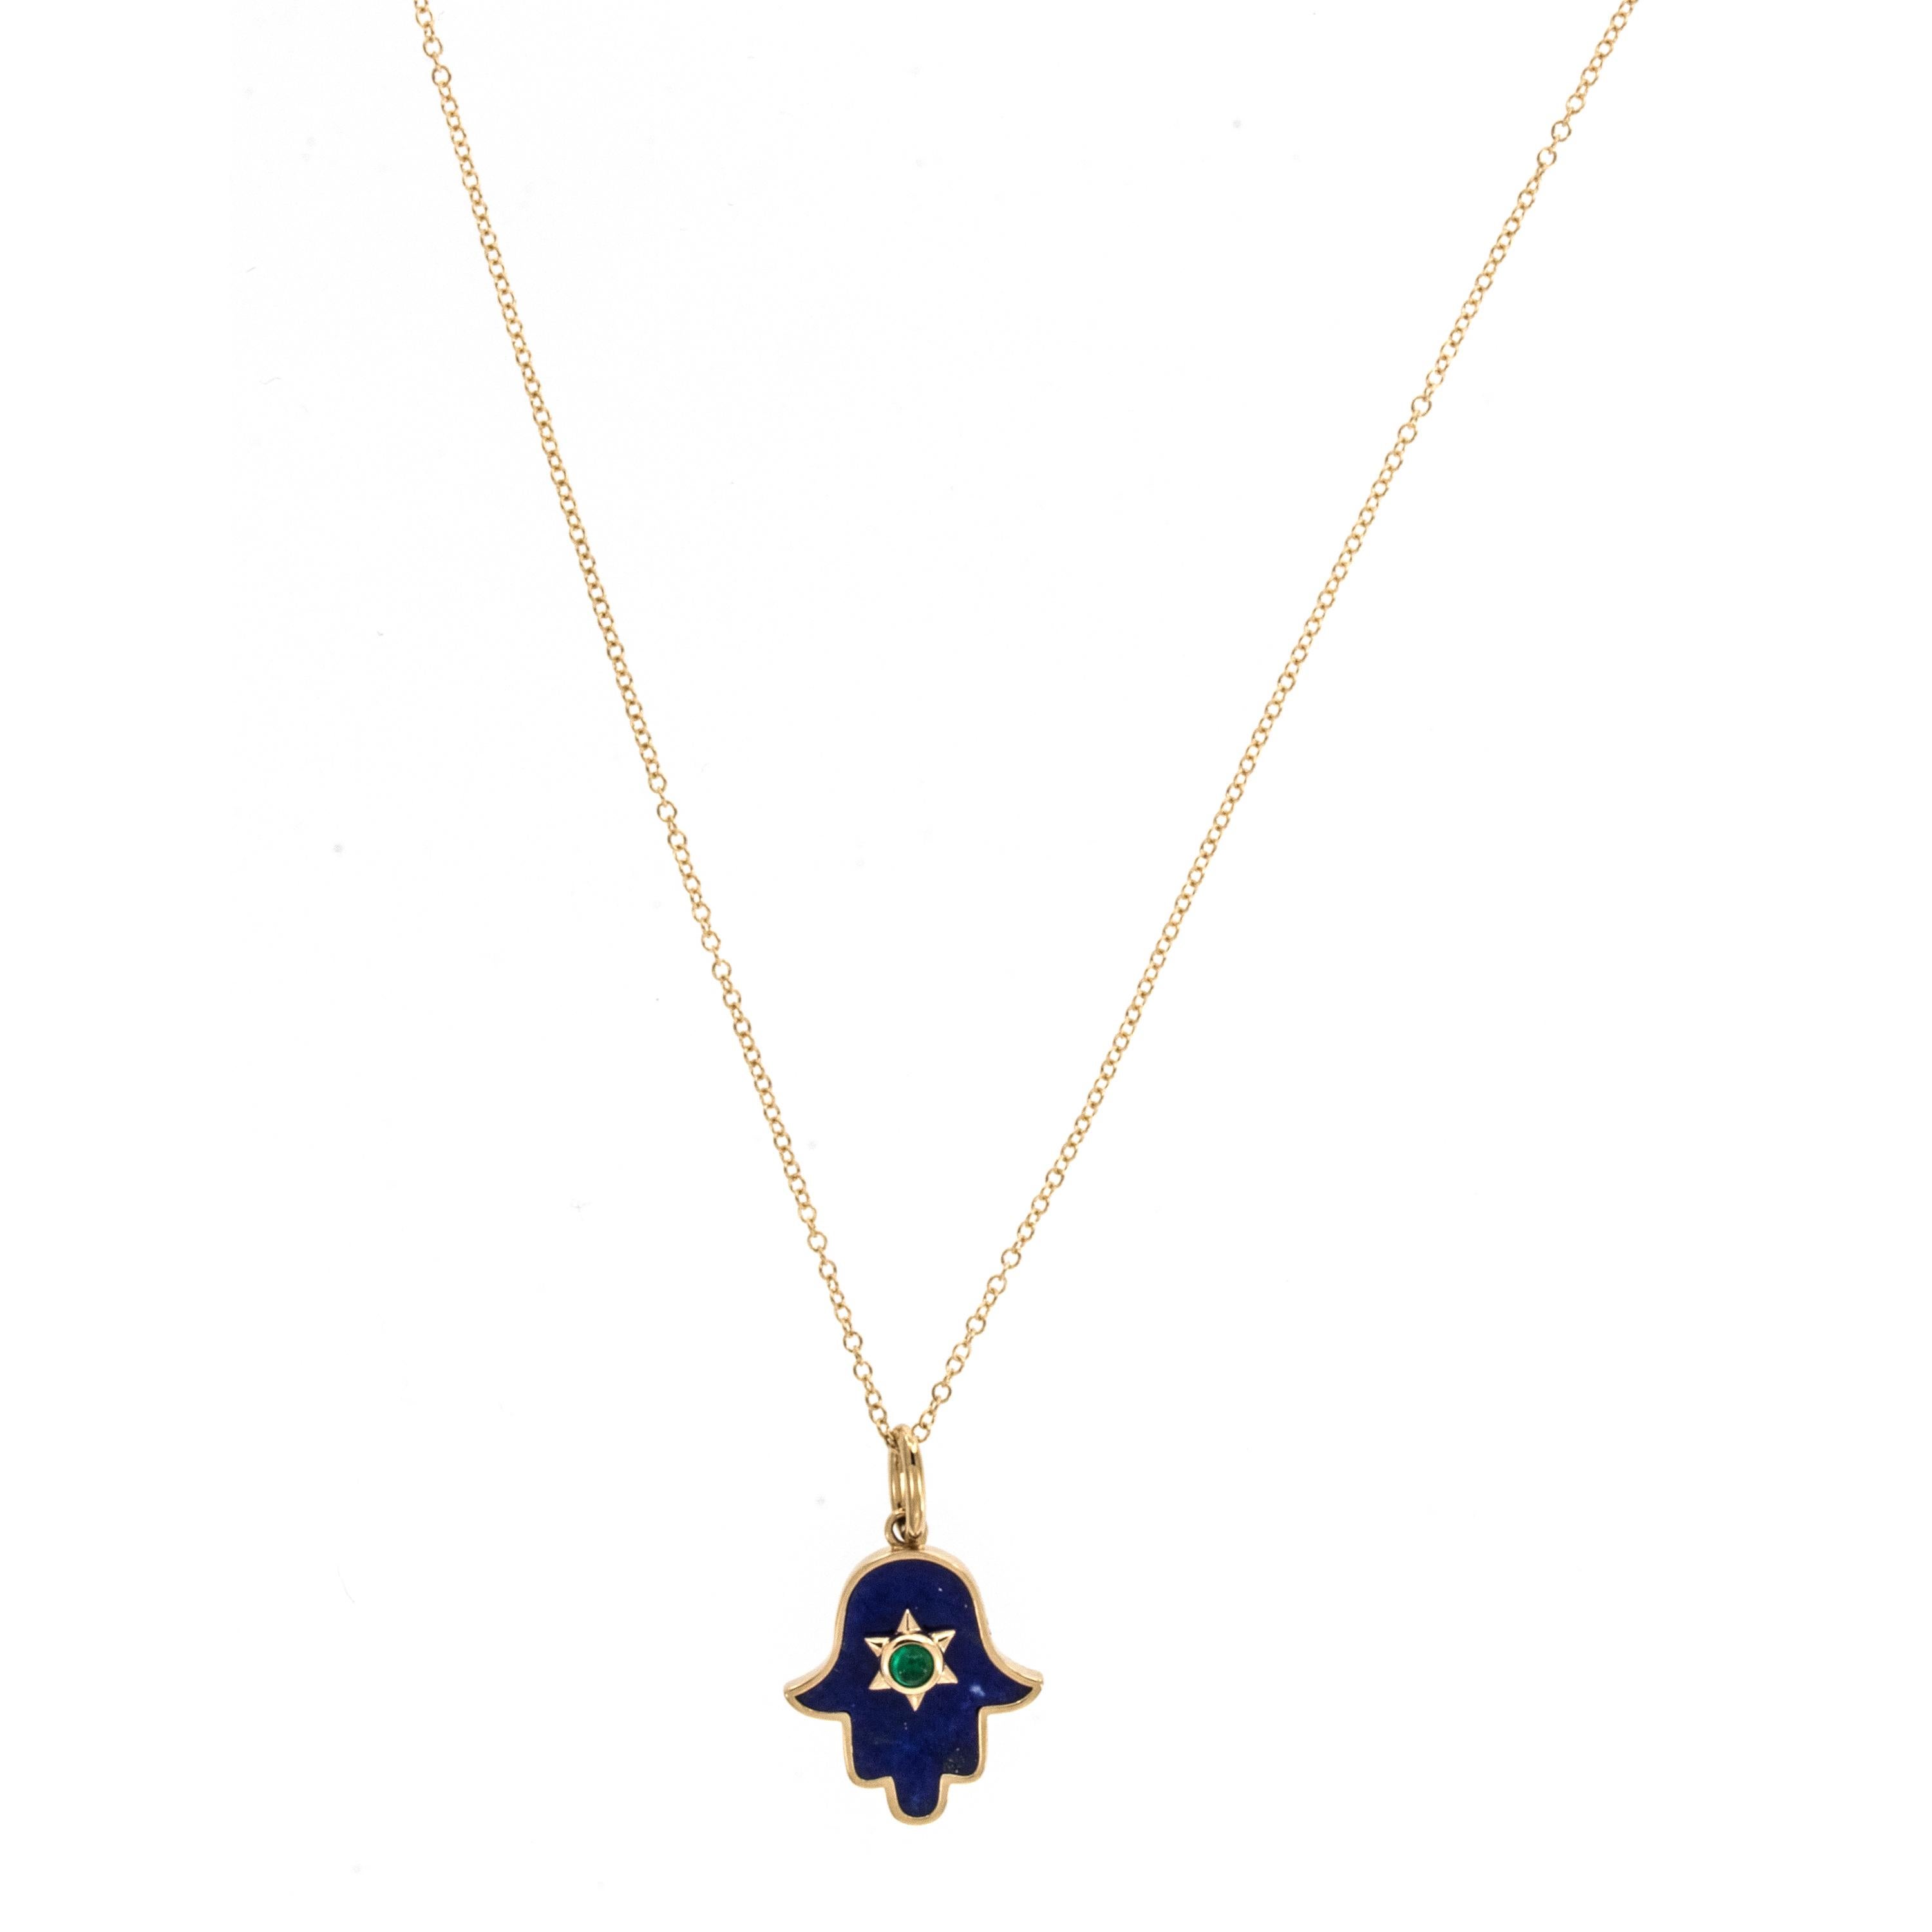 Made from rich 18 karat yellow gold with striking lapis lazuli and emerald 